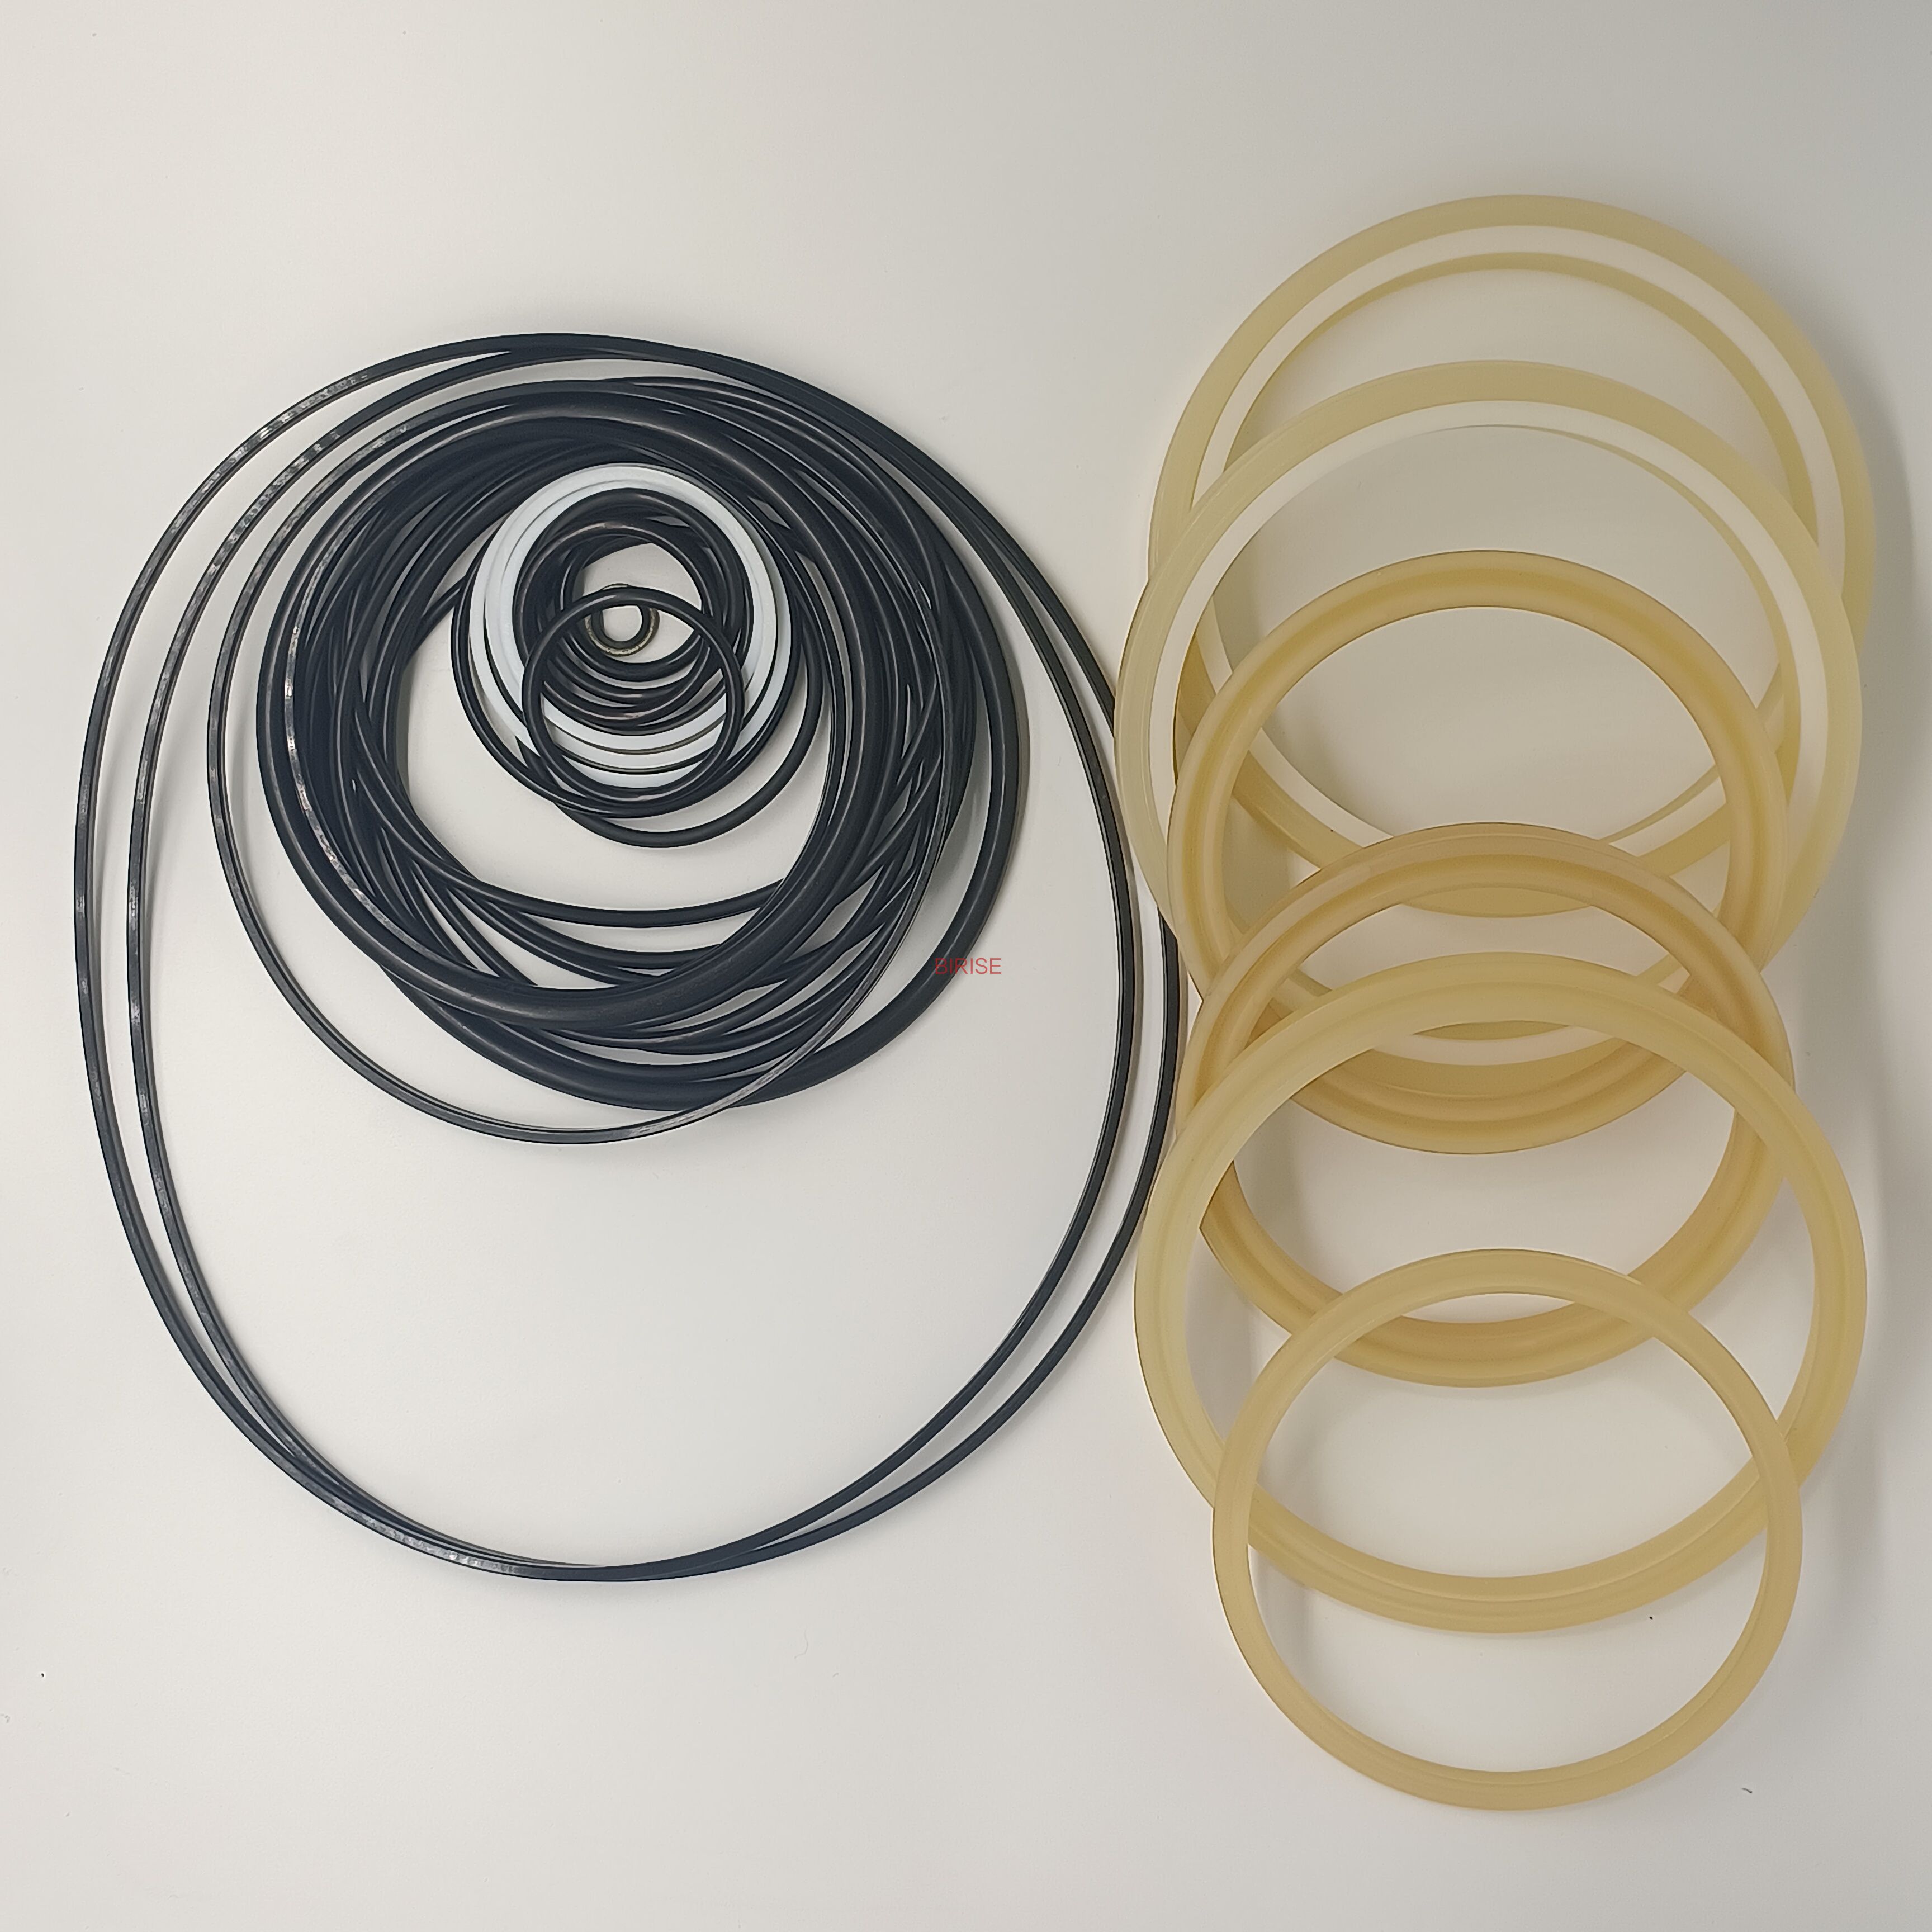 High-Quality Hydraulic Breaker Seal Kits for Efficient Machine Maintenance